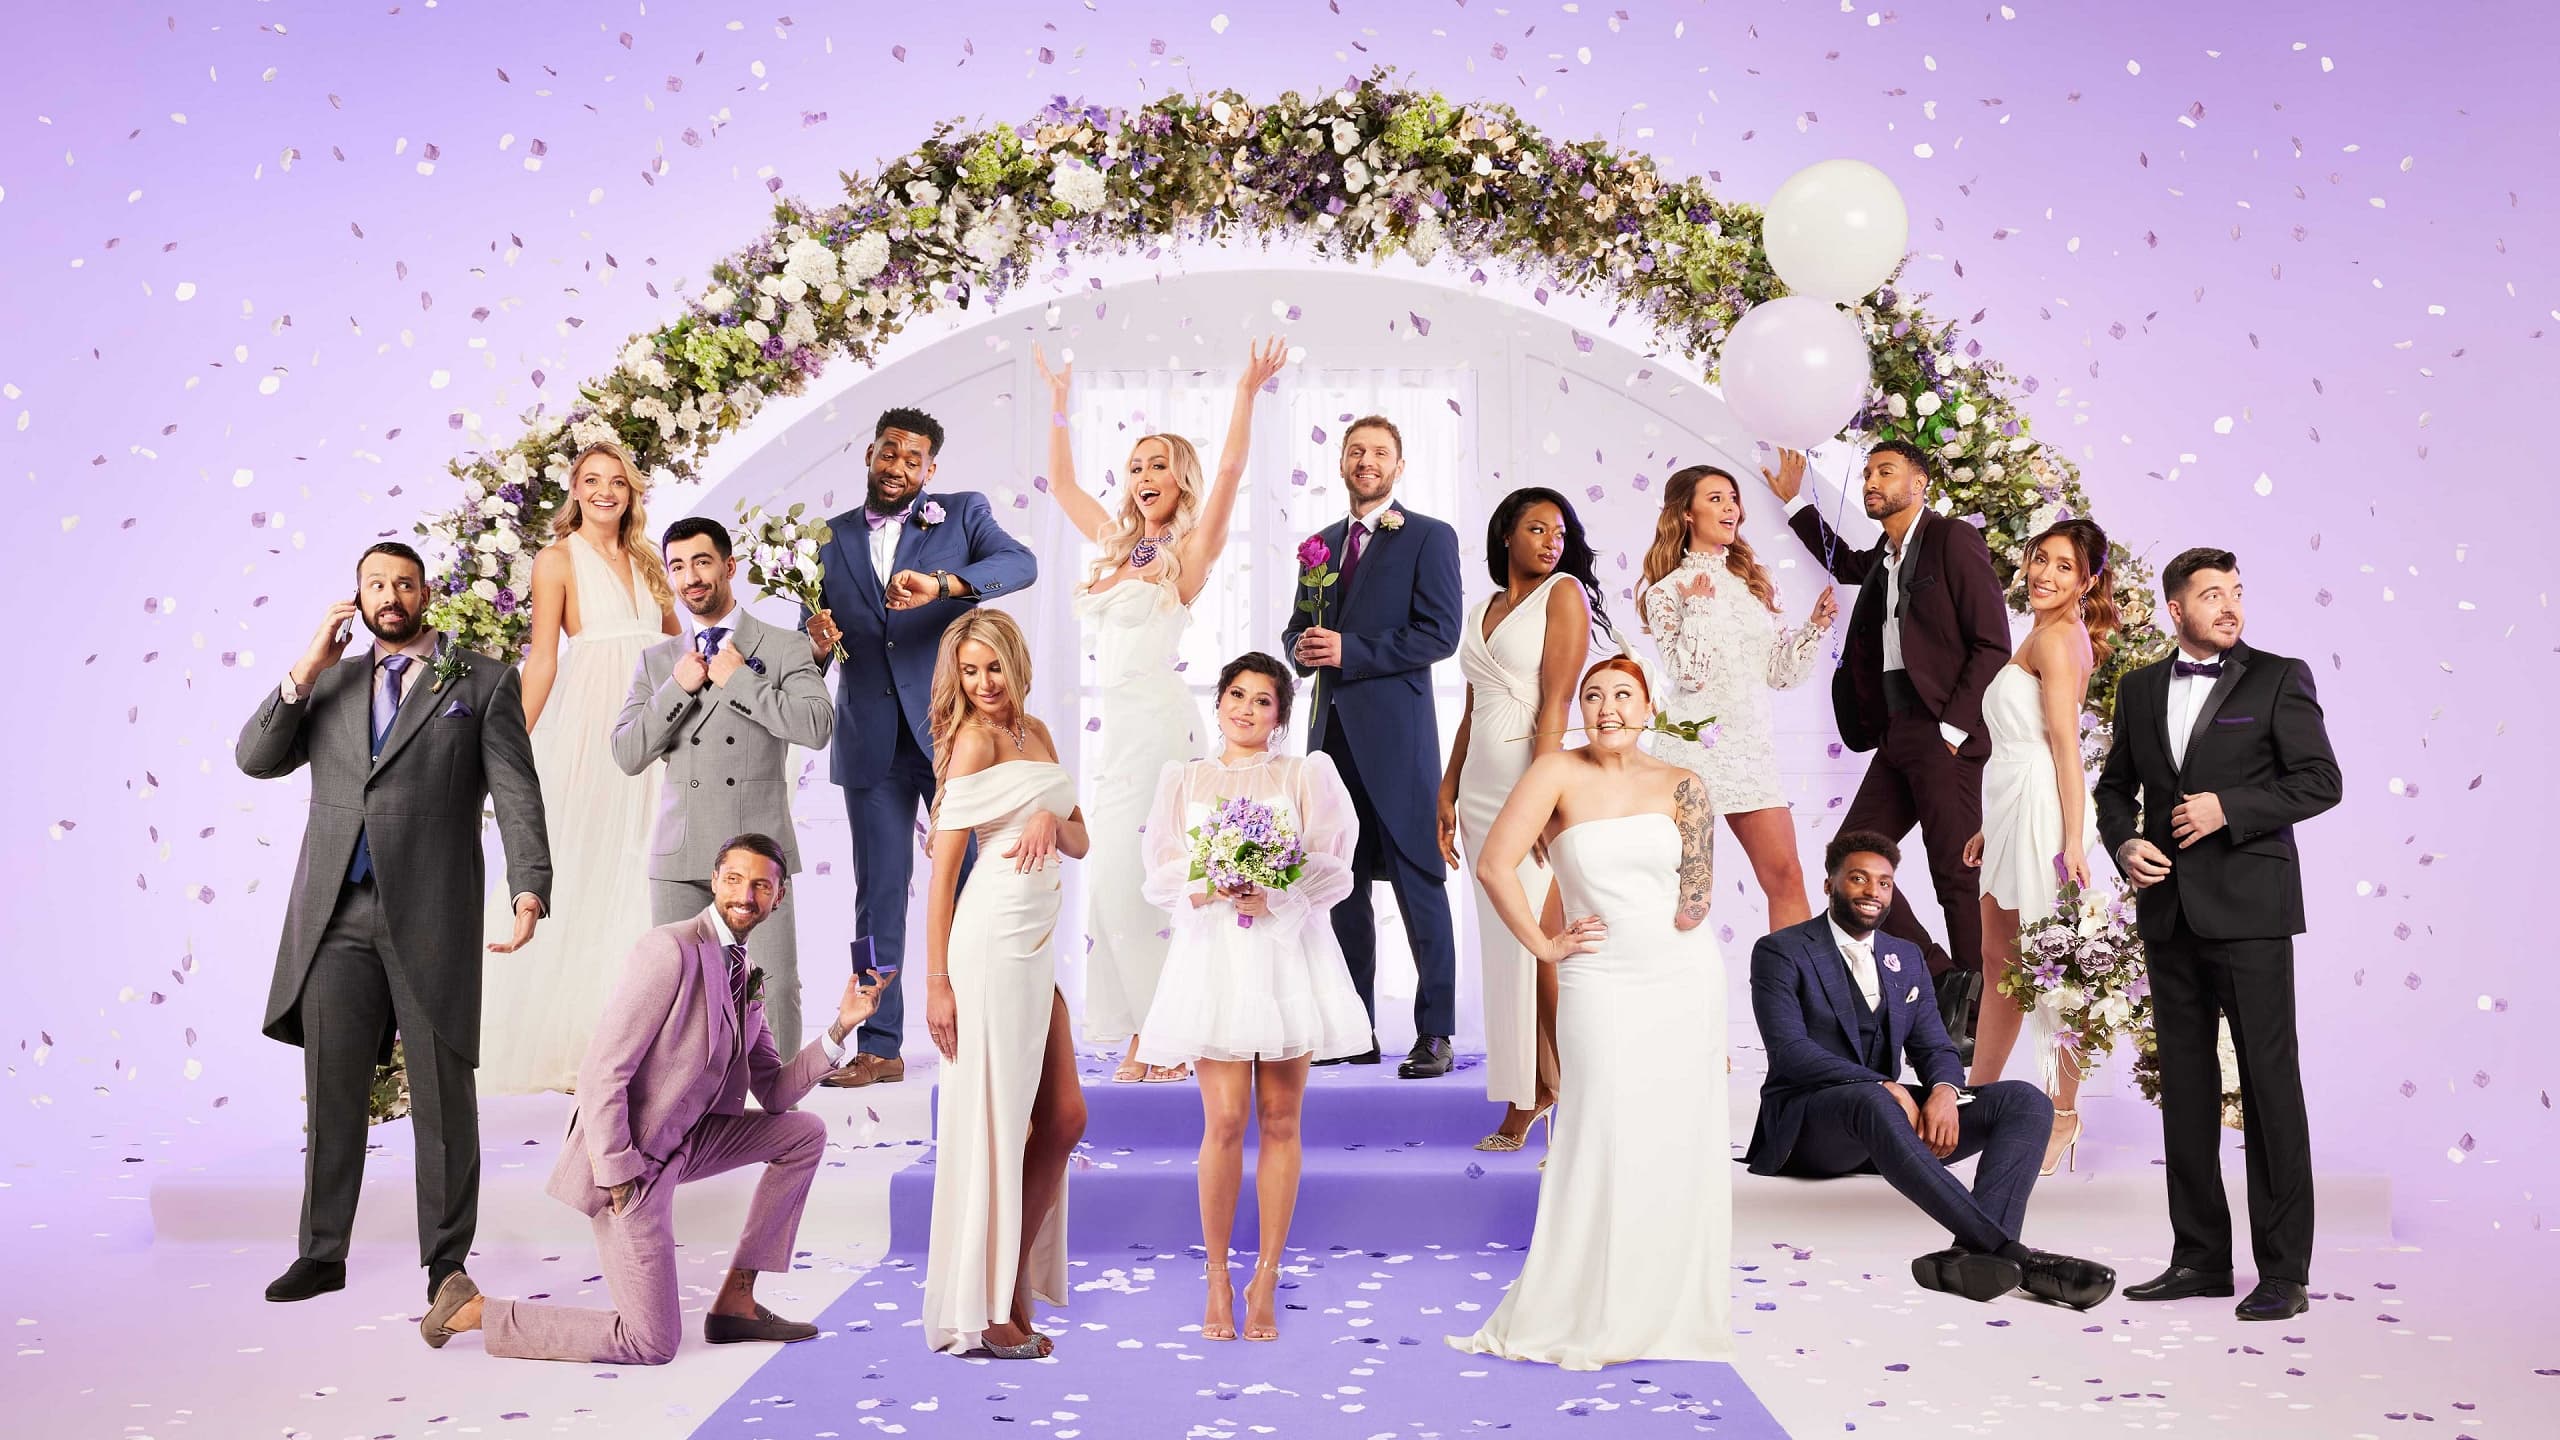 Married at First Sight UK - Season 8 Episode 1